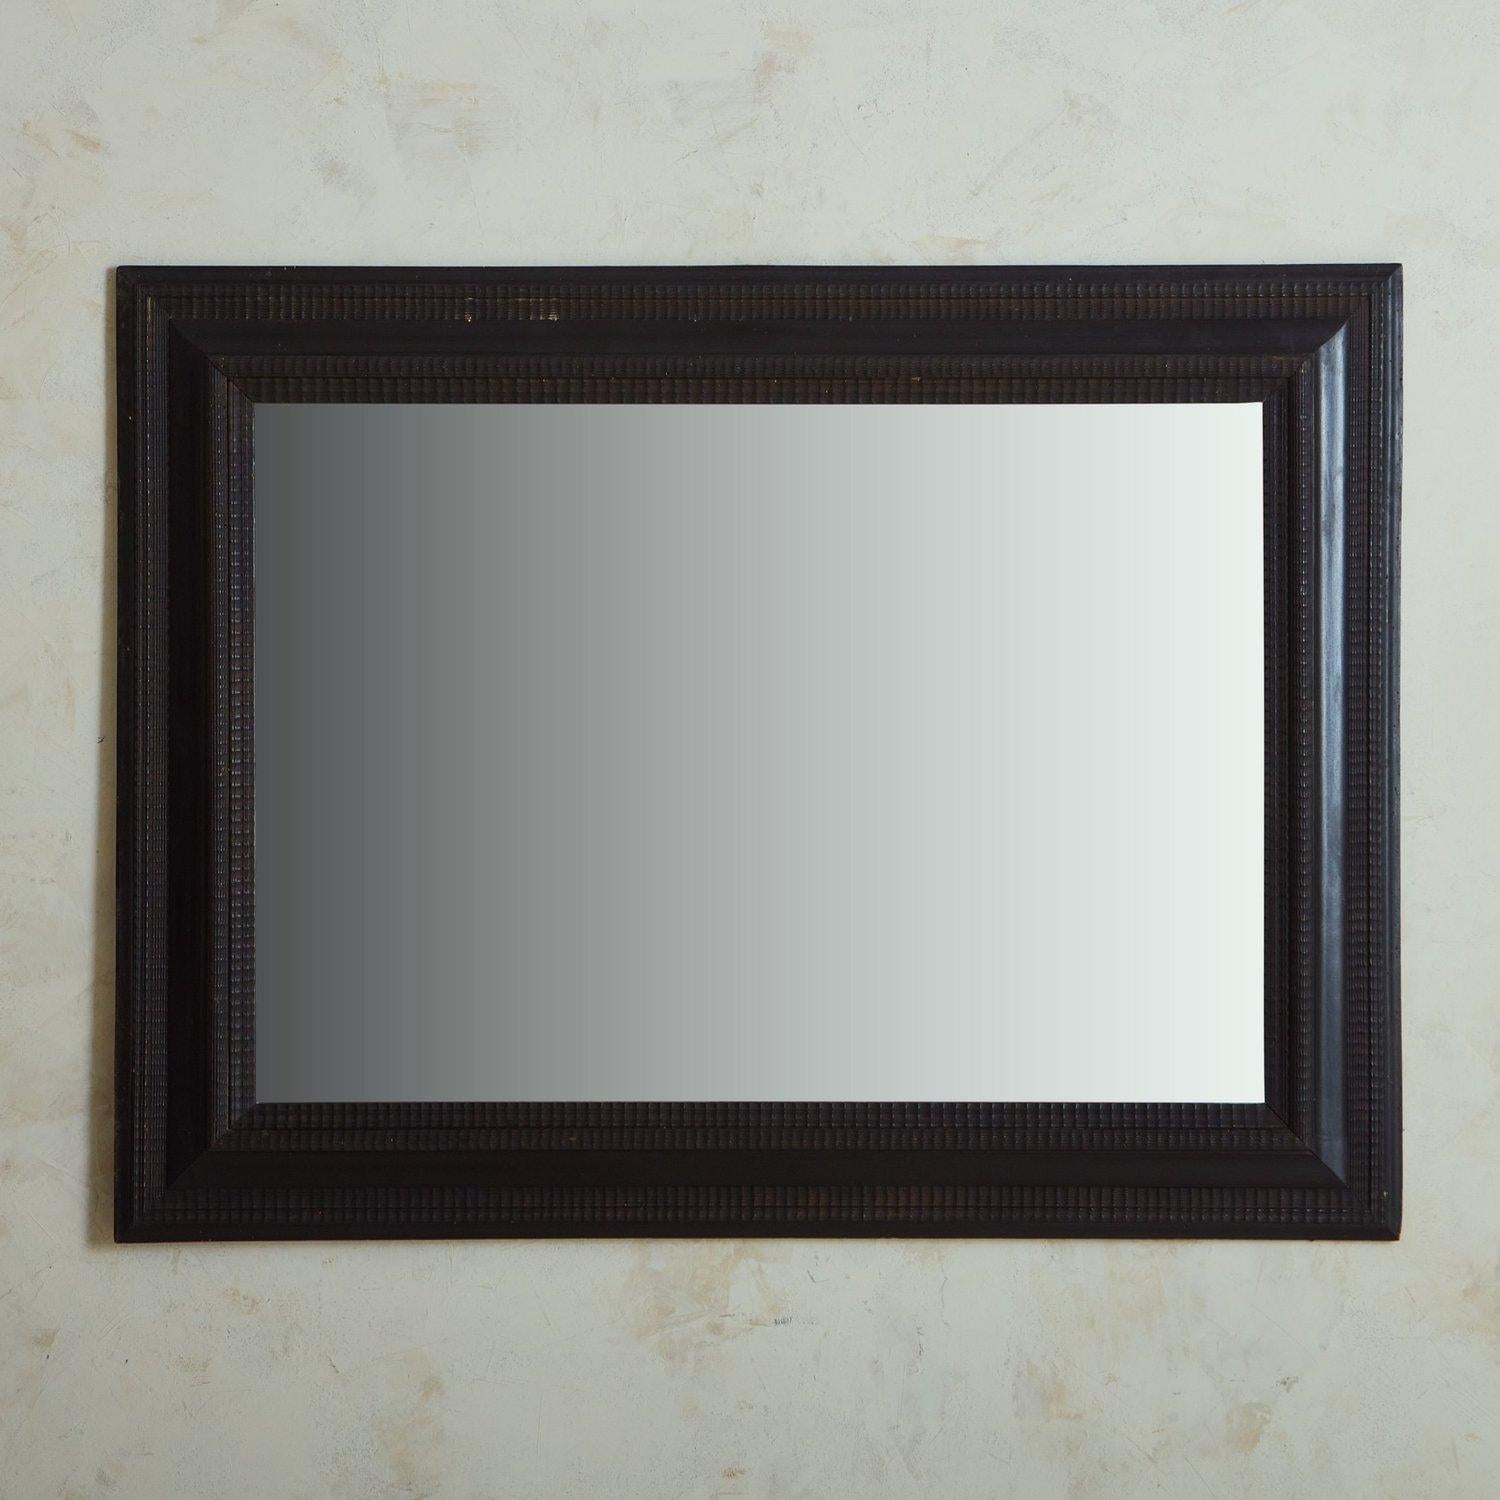 A vintage french wall mirror featuring a rectangular ebonized wood frame with intricate carved linear details. This piece has a wooden backing and hardware for hanging. Sourced in France, 20th Century.